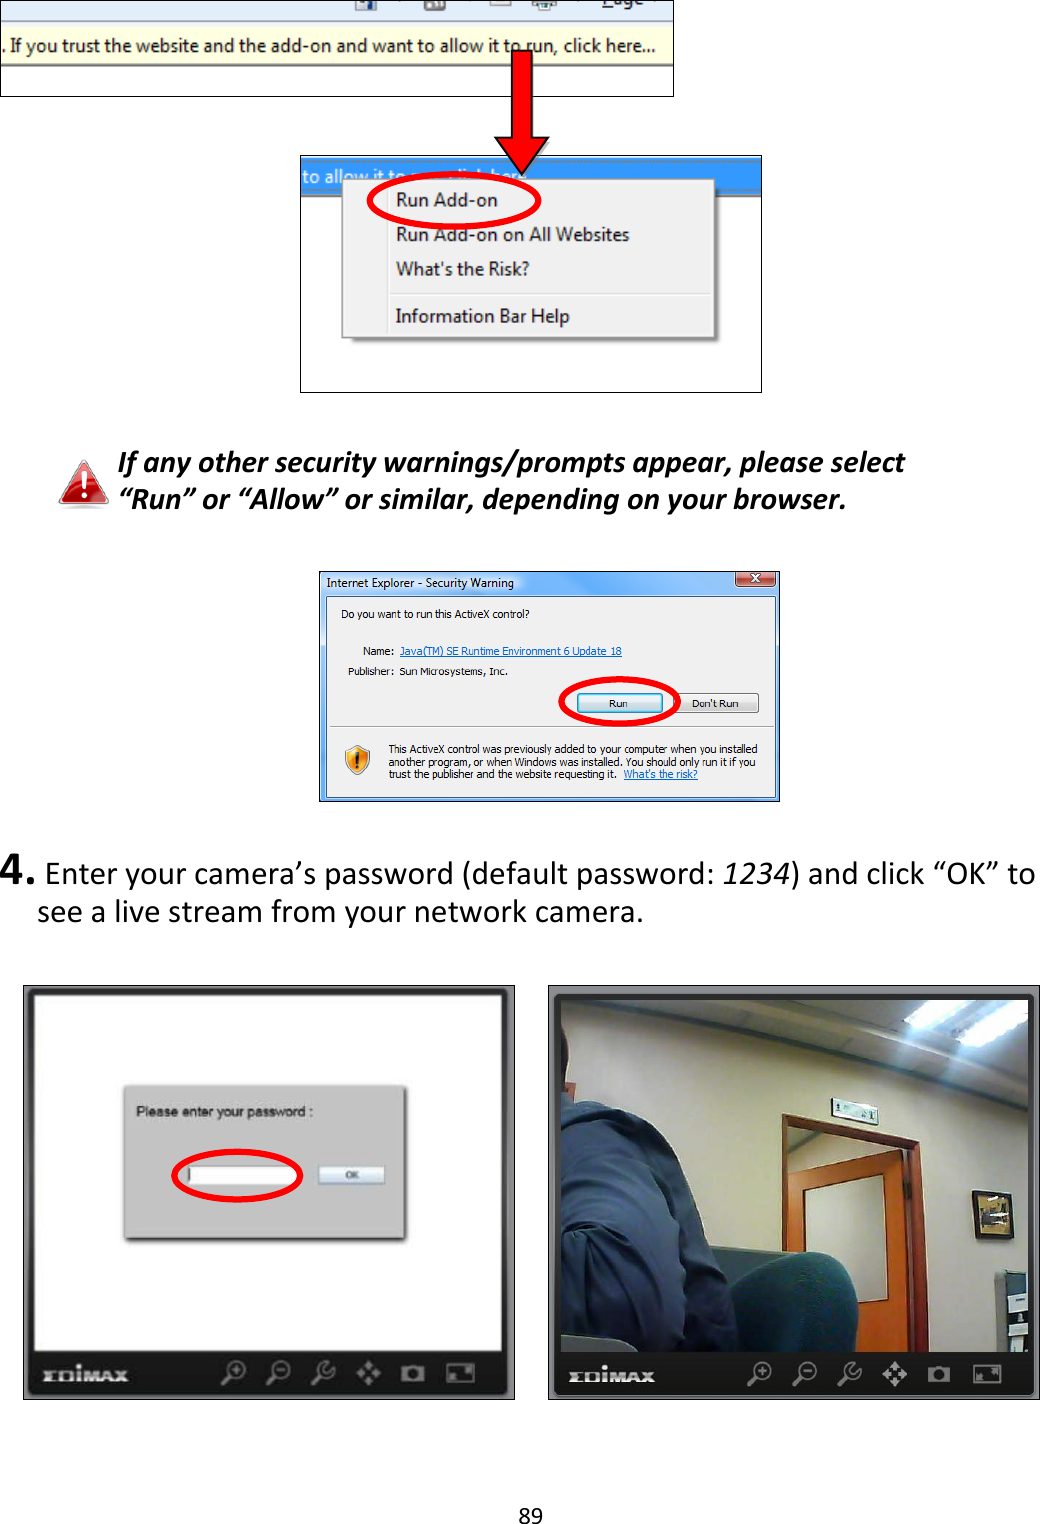 89       If any other security warnings/prompts appear, please select “Run” or “Allow” or similar, depending on your browser.    4.  Enter your camera’s password (default password: 1234) and click “OK” to see a live stream from your network camera.        